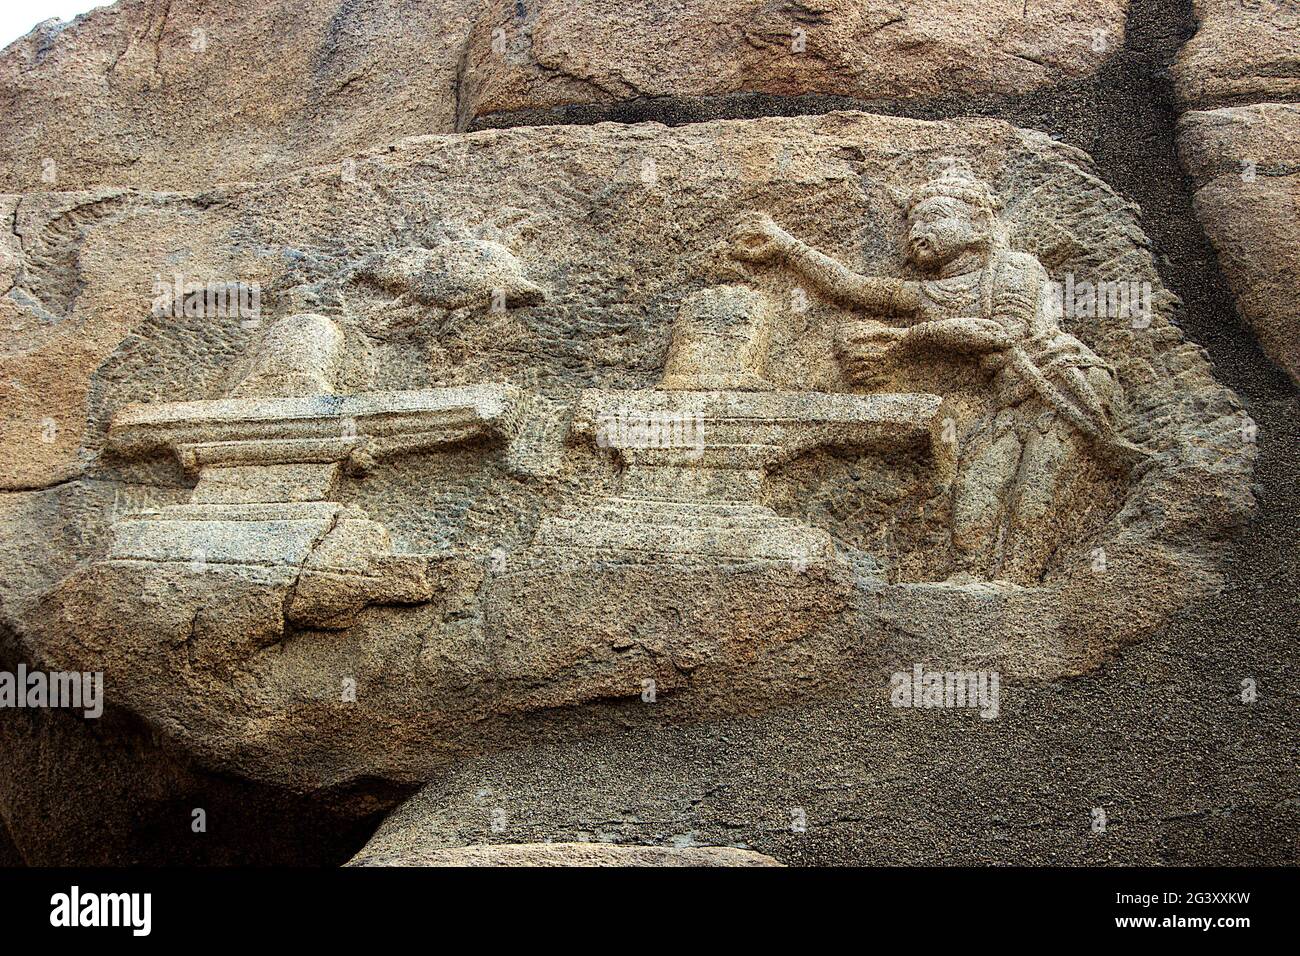 Bas Relief Carving on Rock Face Stock Photo